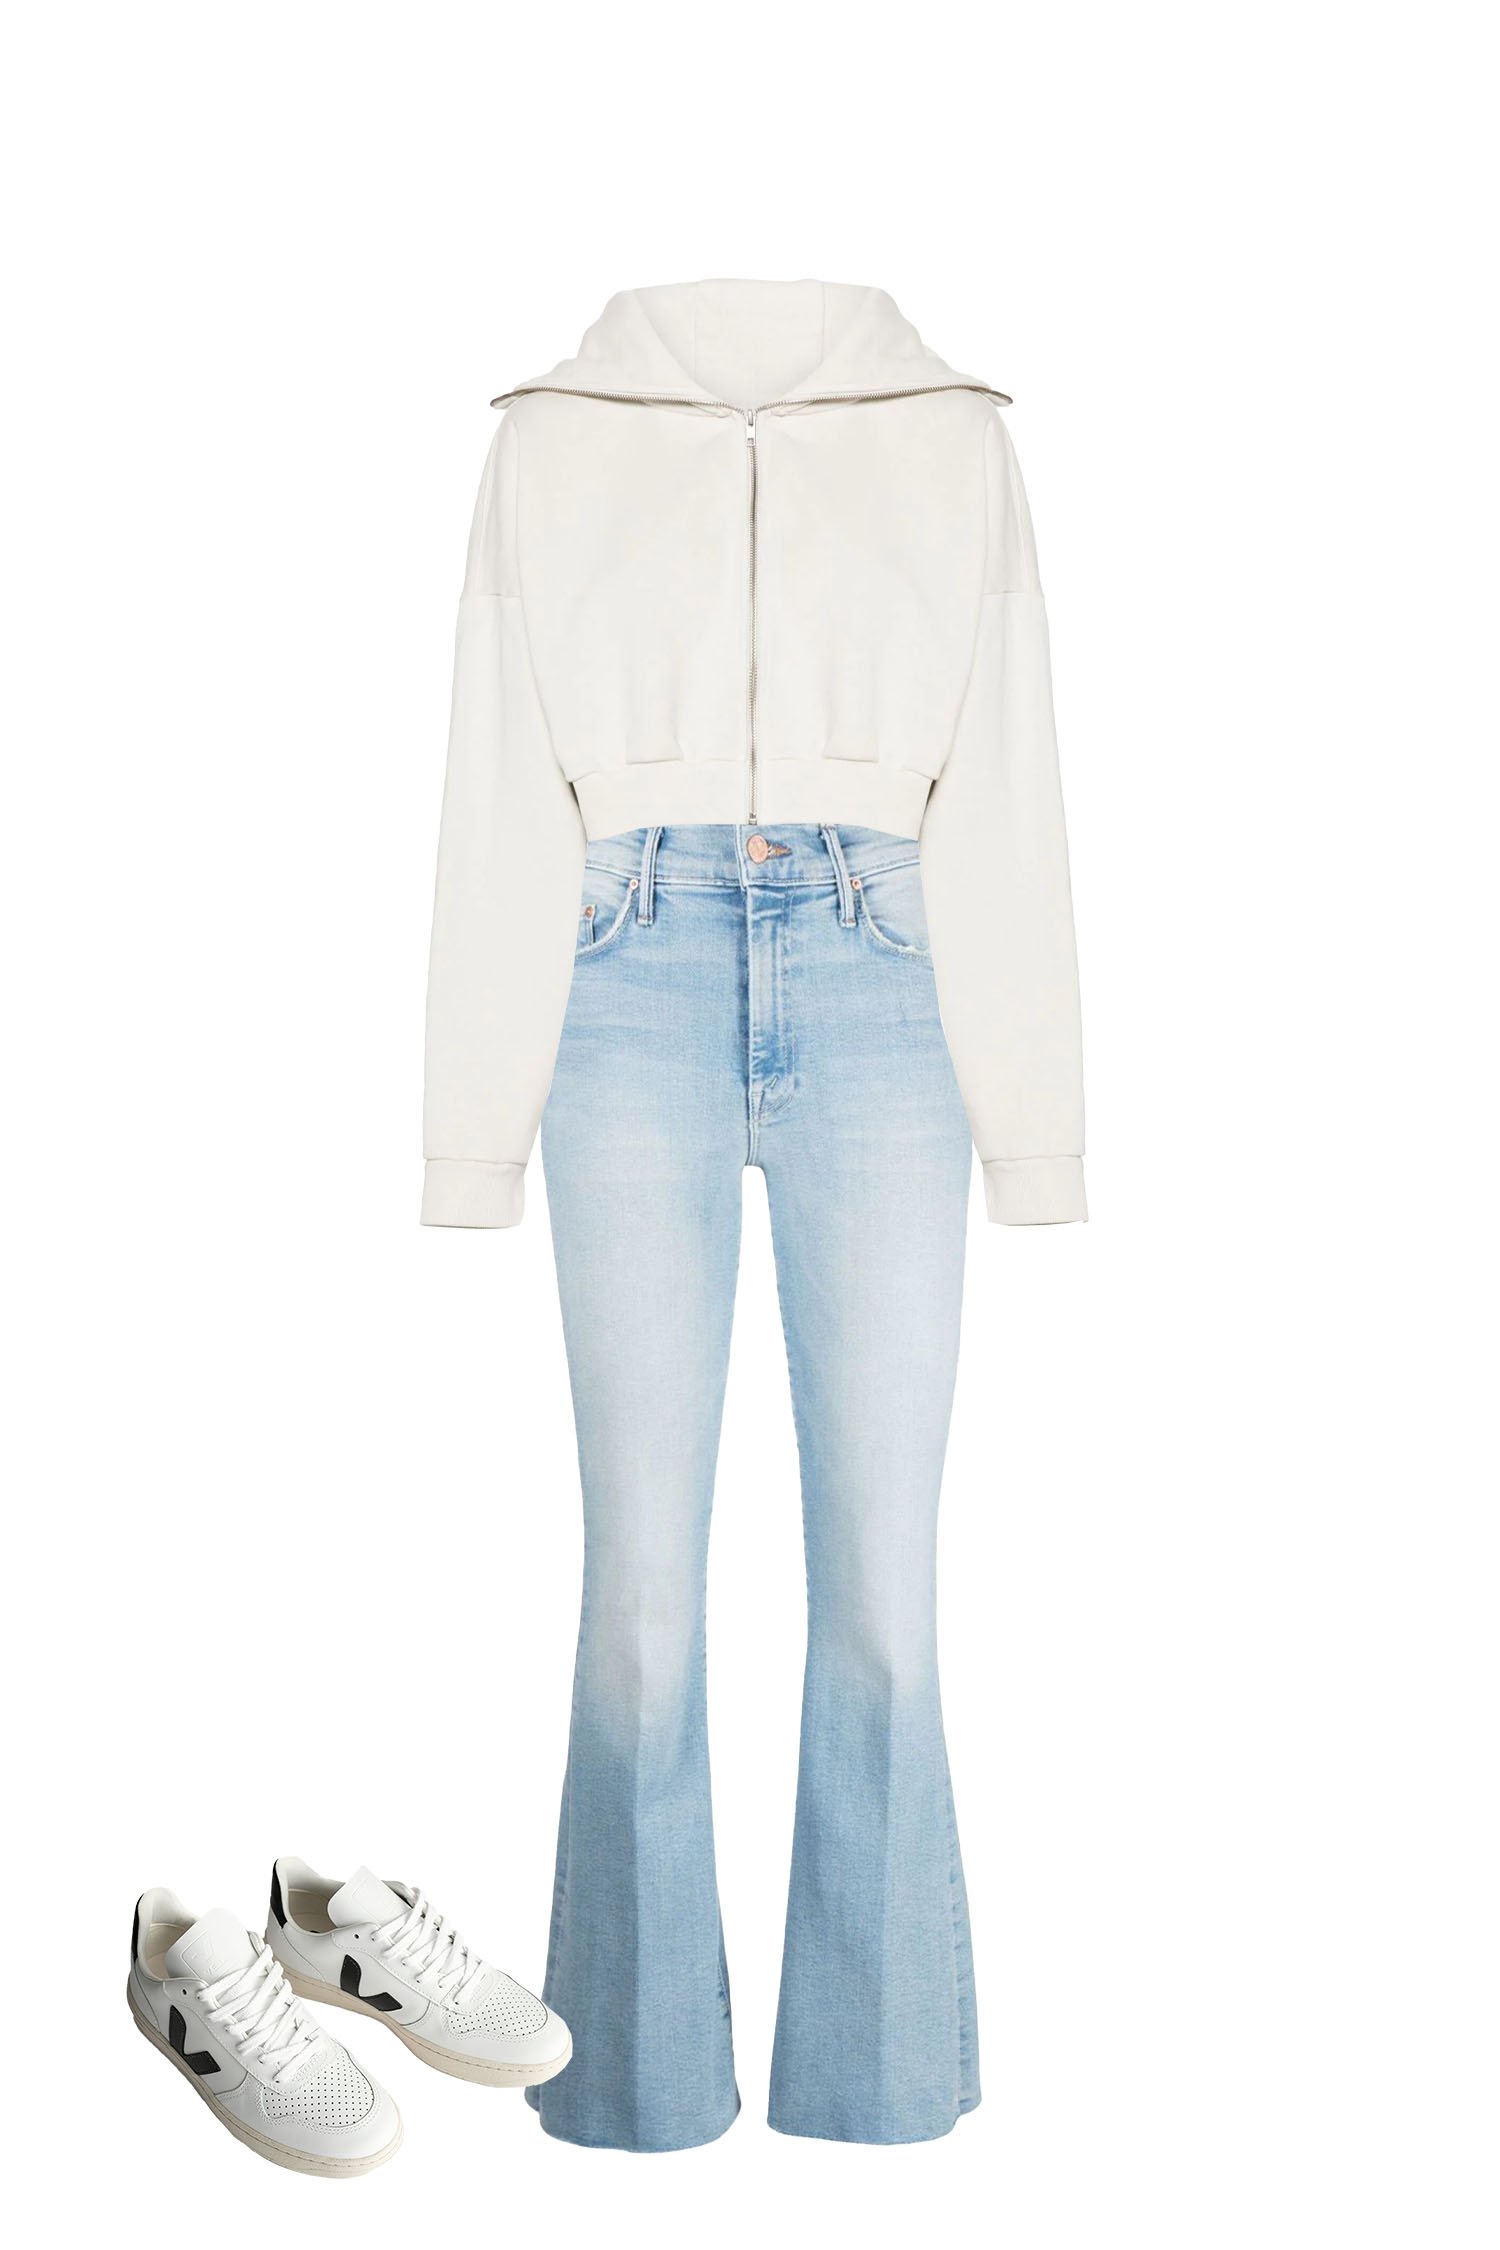 Pair Light Blue Flare Jeans with a White Cropped Zipped Hoodie, and White Sneakers